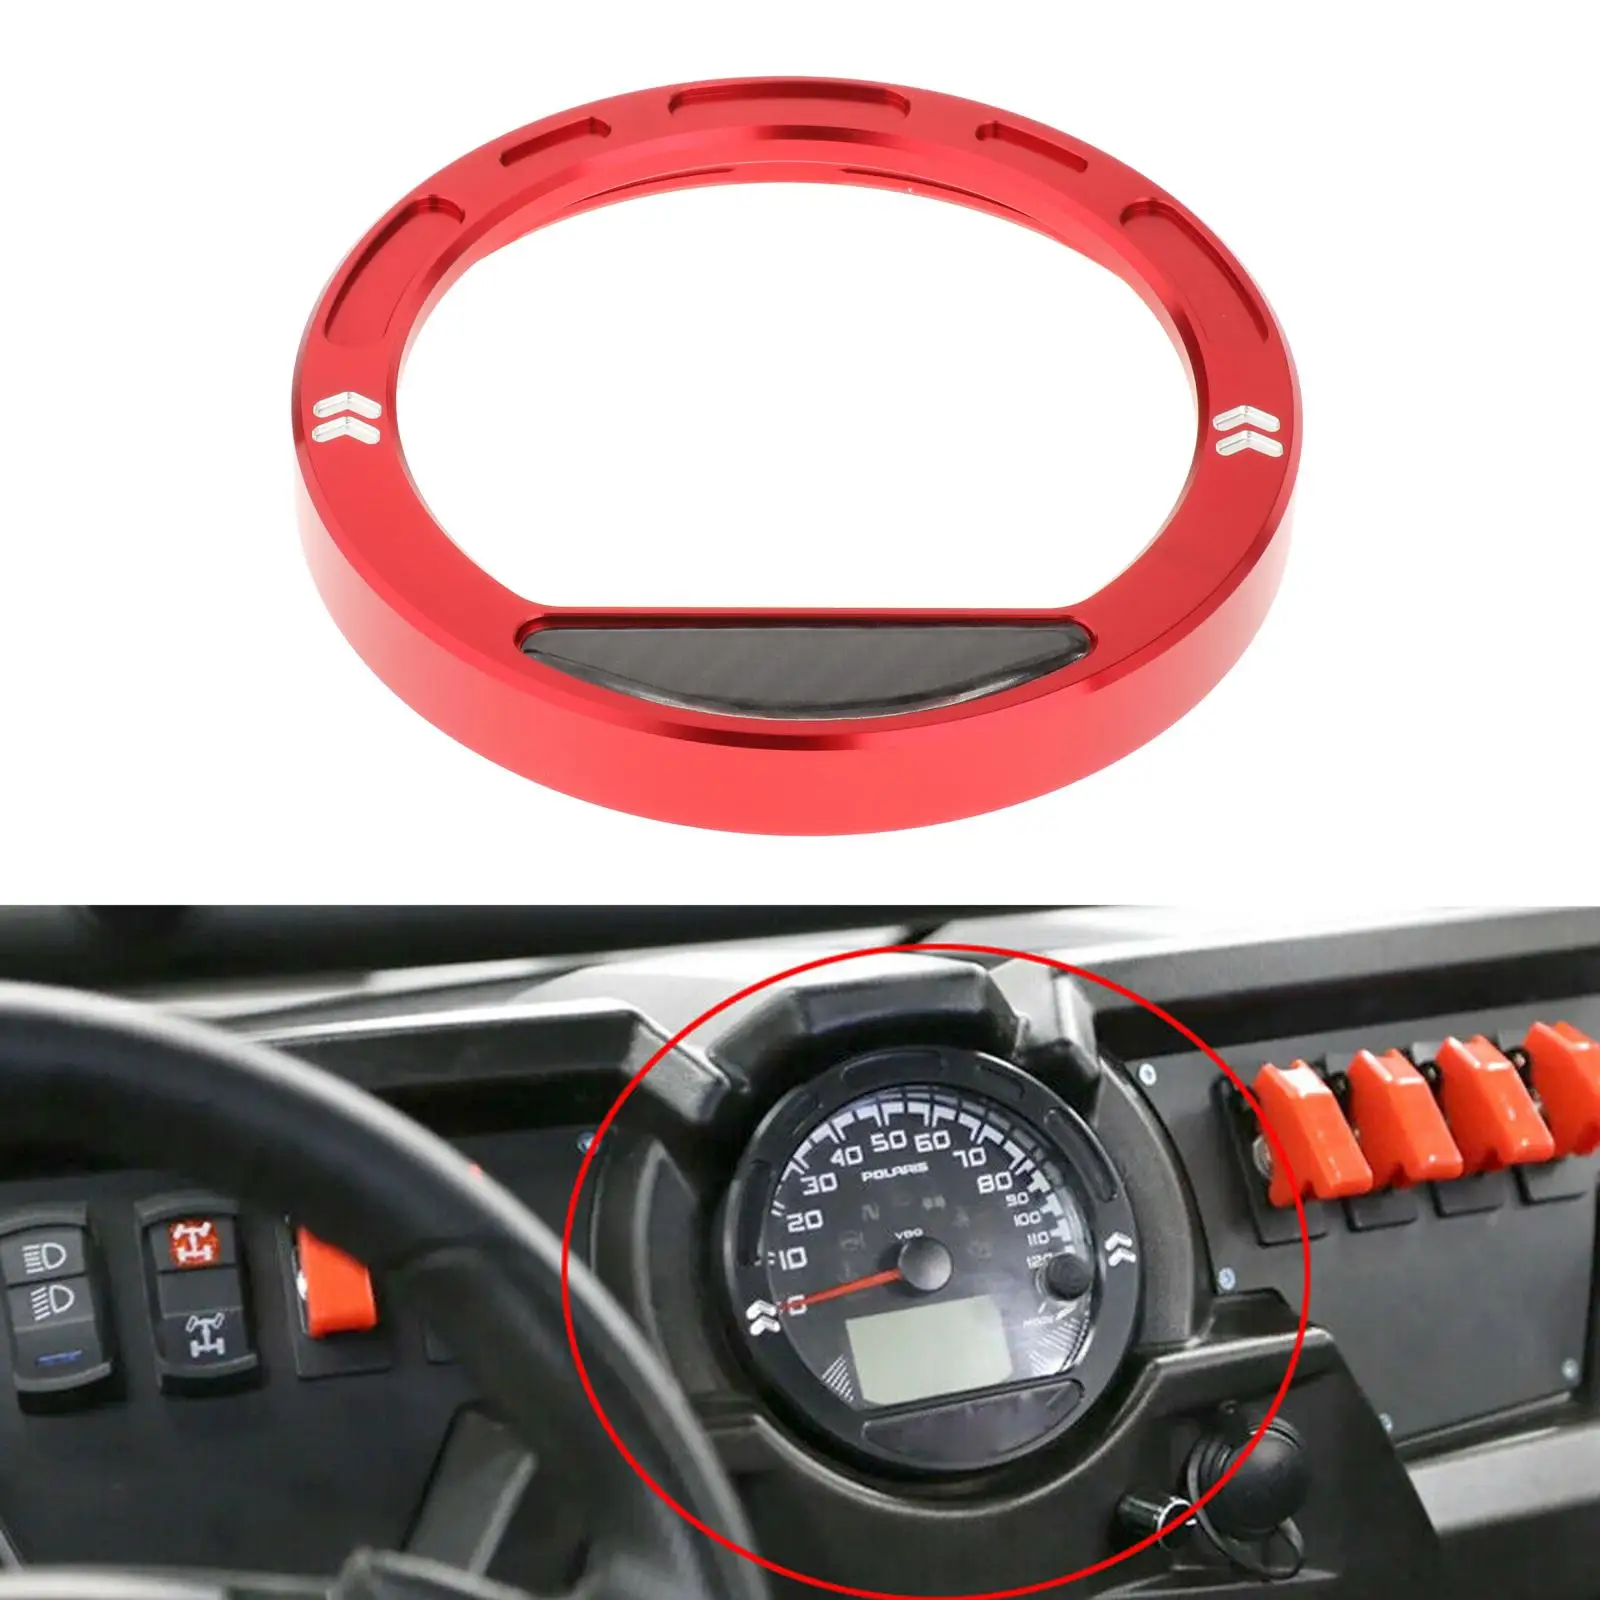 CNC Billet Motorcycle Speedometer Guage Bezel Cover Trim Ring Compatible with Polaris RZR 570 800 900 RZR 1000